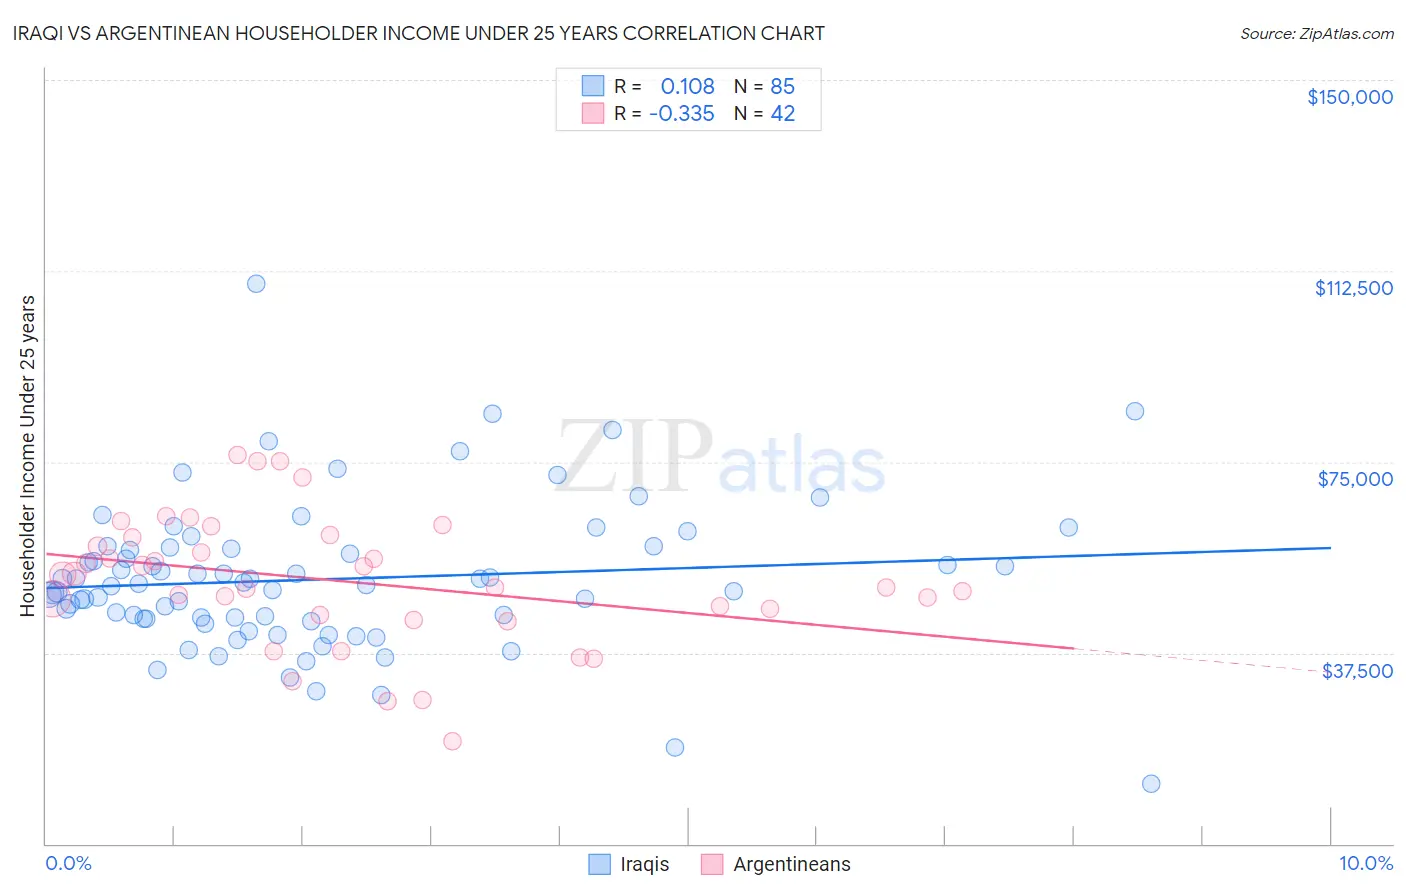 Iraqi vs Argentinean Householder Income Under 25 years